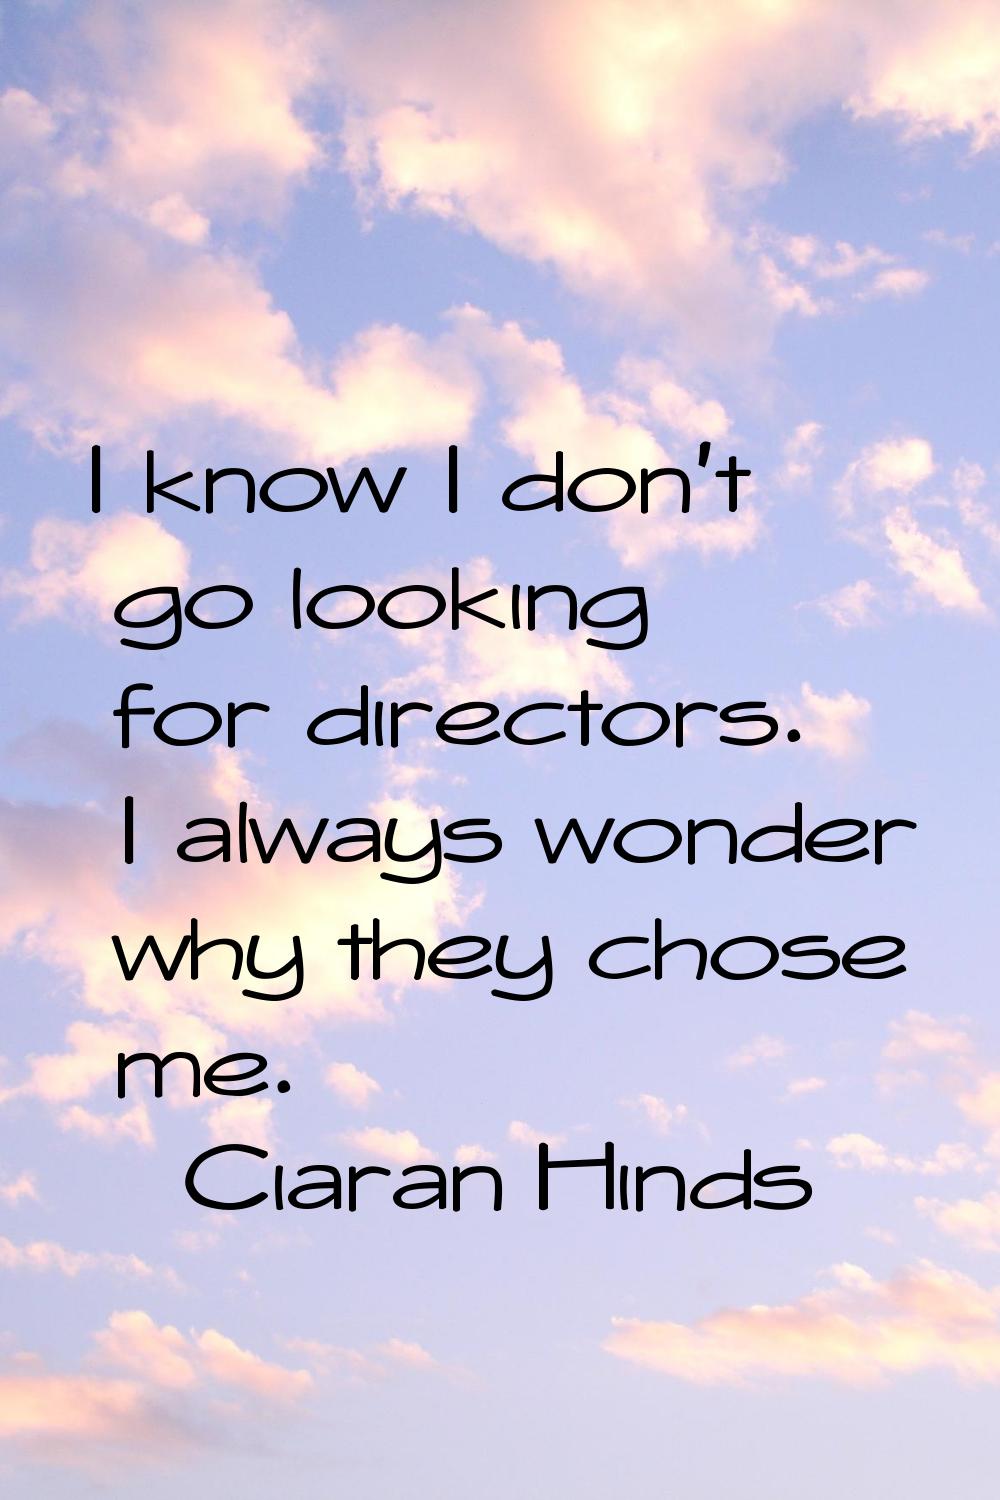 I know I don't go looking for directors. I always wonder why they chose me.